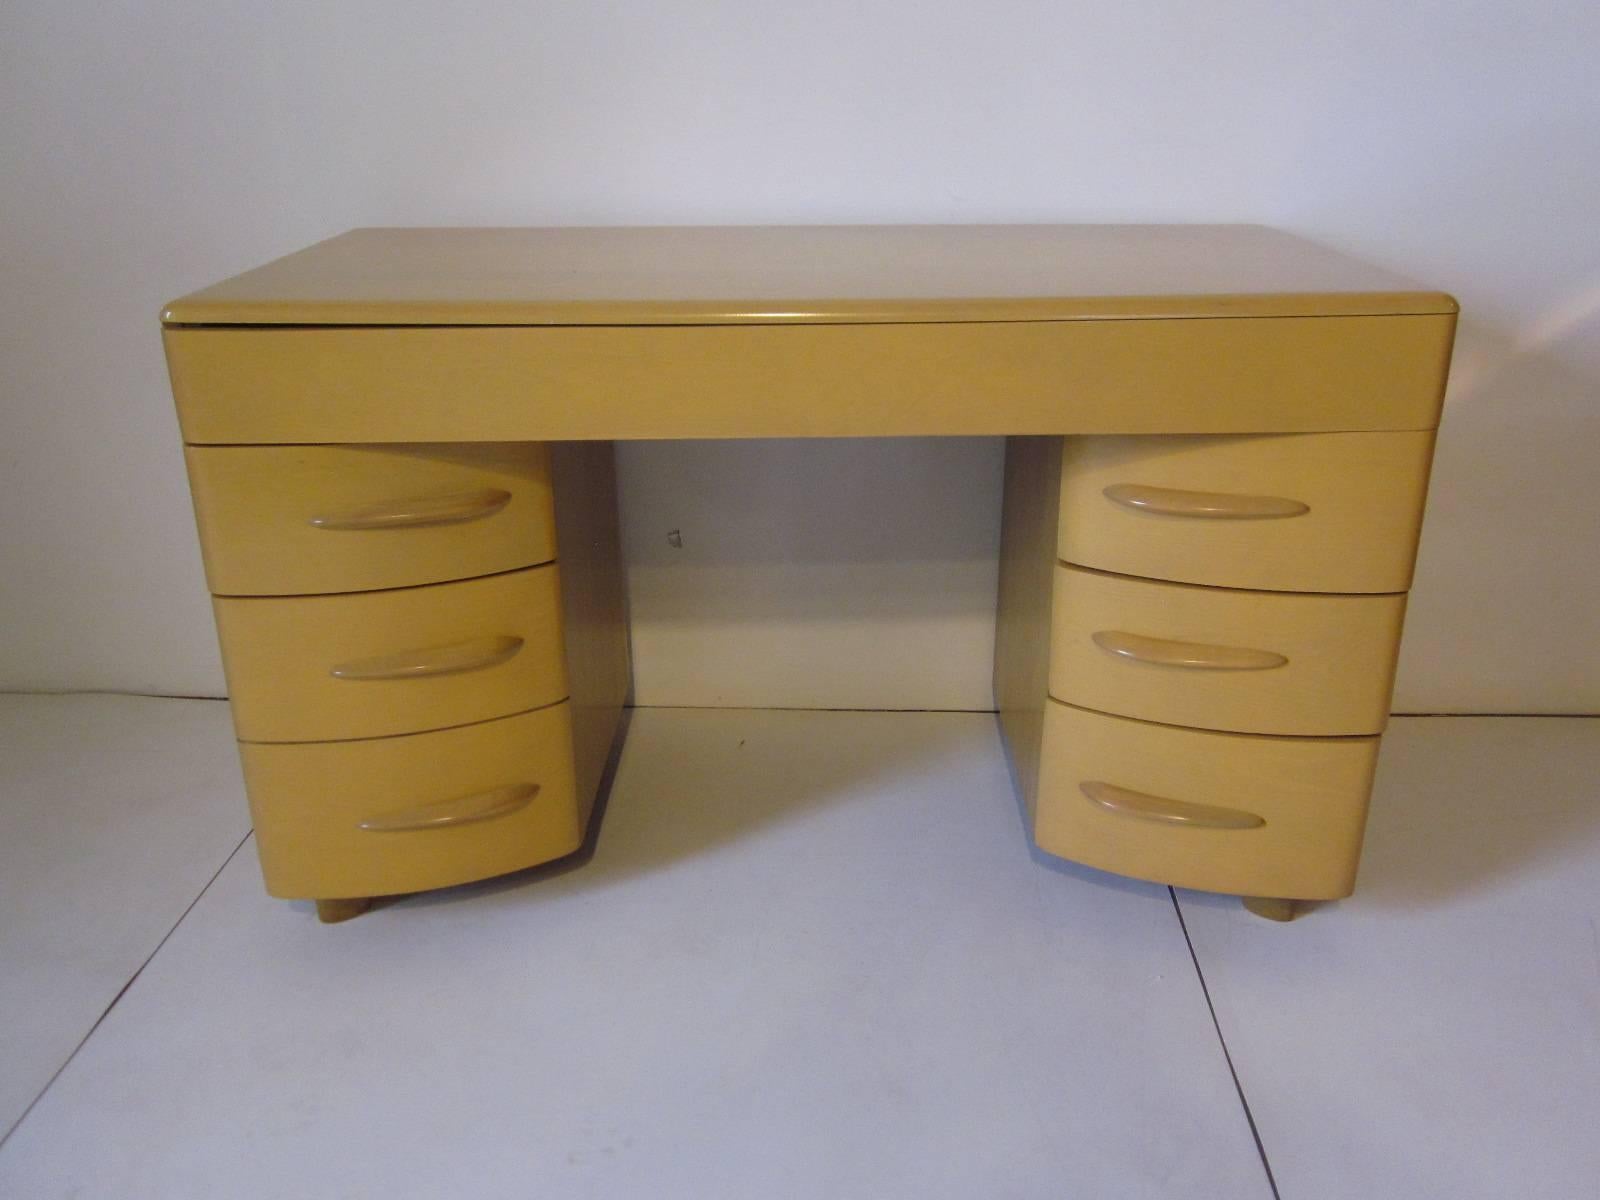 A six-drawer turned in based kneehole desk with upper drawer, one file drawer and four side drawers with streamline pulls. In a wheat toned finish manufactured by the Heywood-Wakefield furniture company.